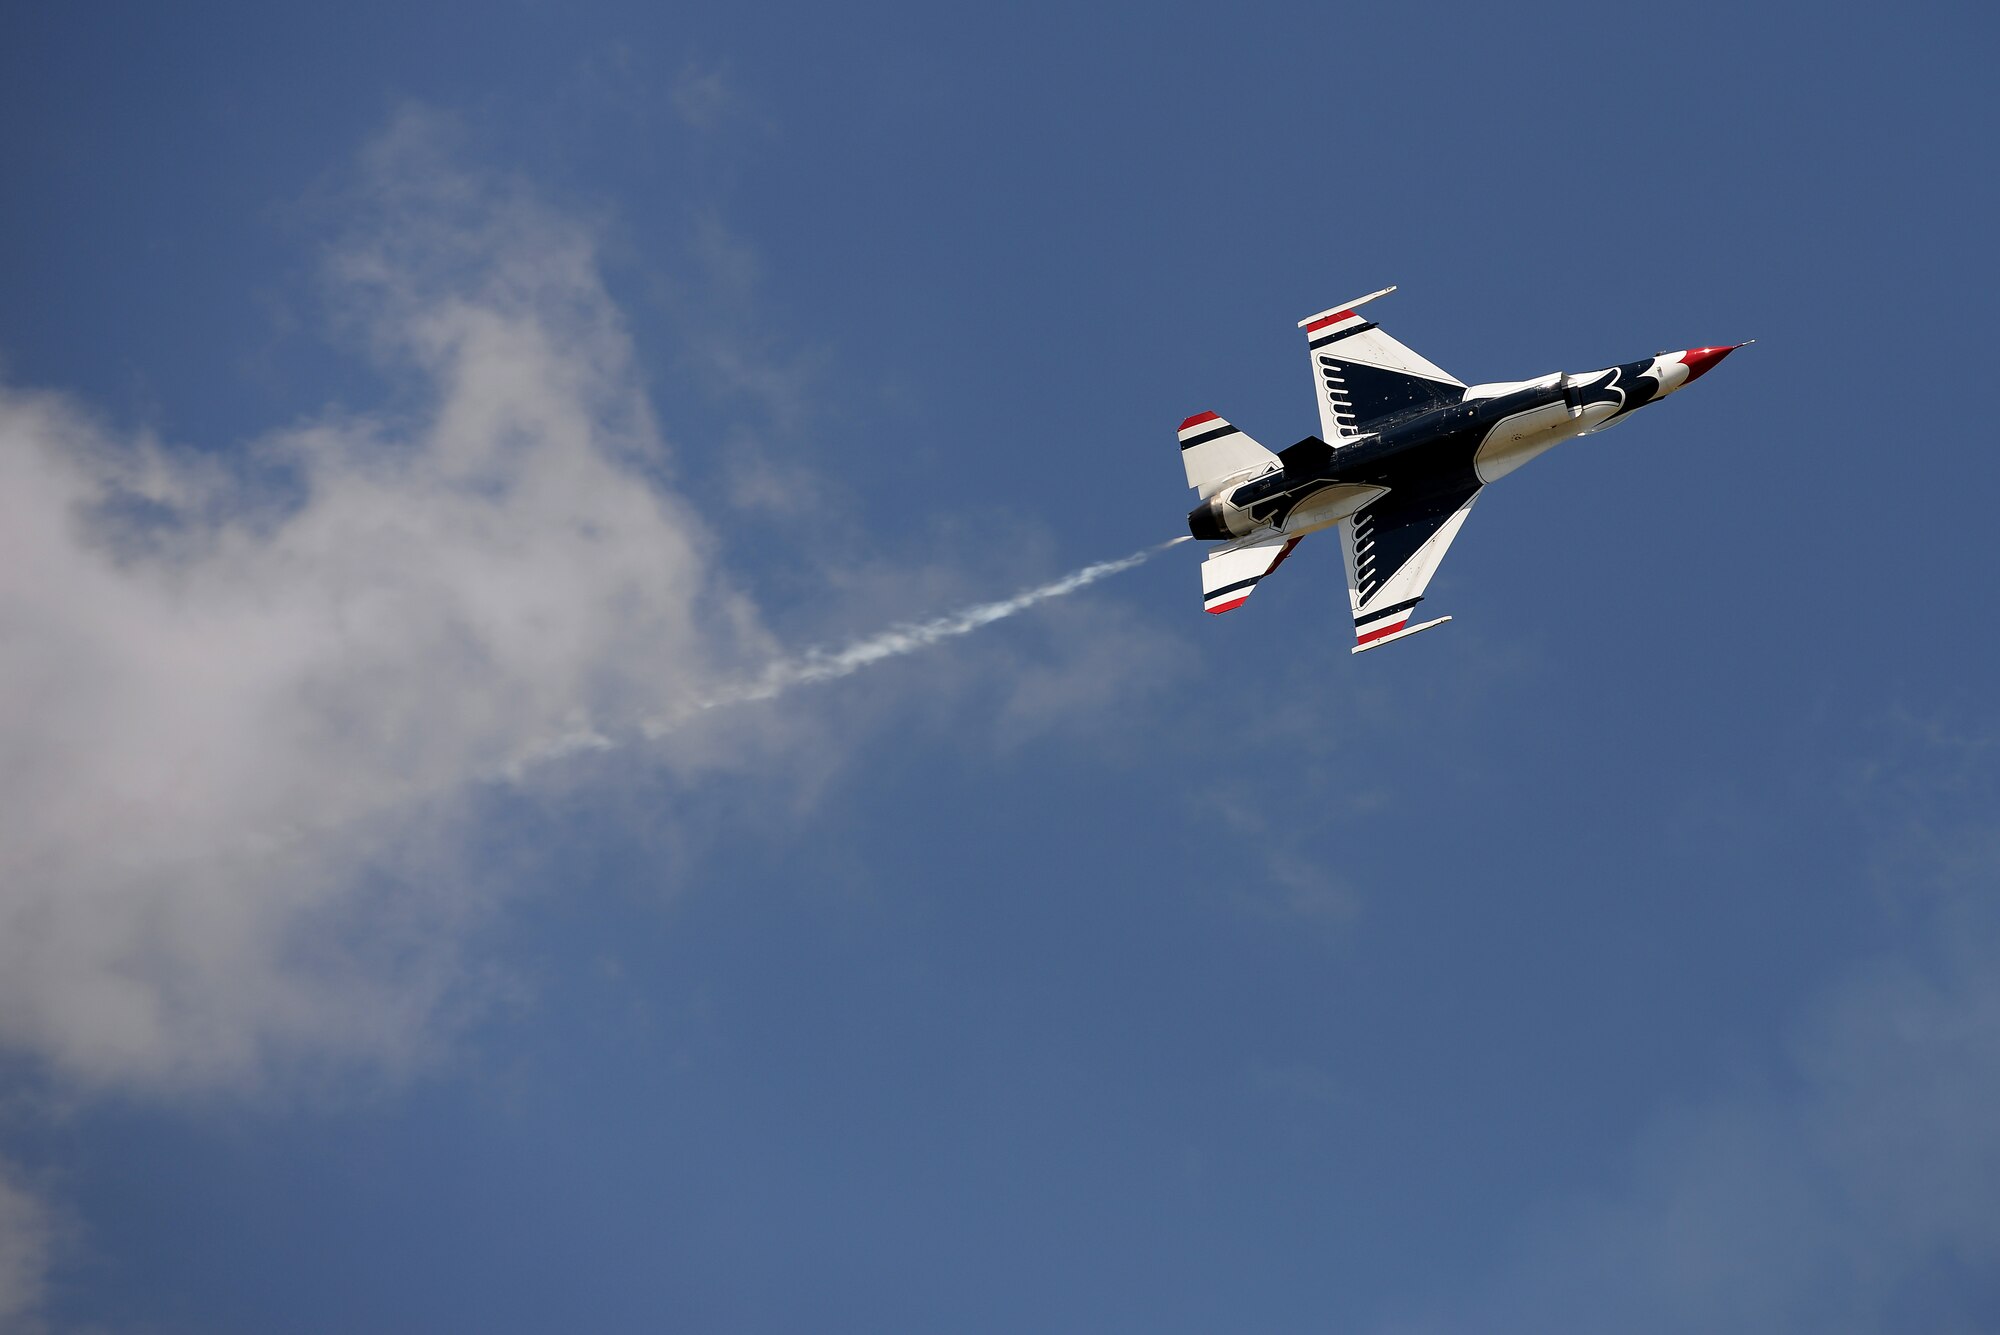 The Thunderbirds, officially known as the U.S. Air Force Air Demonstration Squadron, perform precision aerial maneuvers to demonstrate the capabilities the F-16 Fighter Falcon, the Air Force’s premier multi-role fighter jet, Scott Air Force Base, Ill., June 11, 2017.   Eight highly experienced fighter pilots, four support officers, three civilians, and over 120 enlisted personnel help make it possible for the team to showcase the capabilities of this fighter jet to millions of people each year.  Together, this team has ensured that a demonstration has never been cancelled due to maintenance difficulty. (U.S. Air Force photo by Tech. Sgt. Jonathan Fowler)